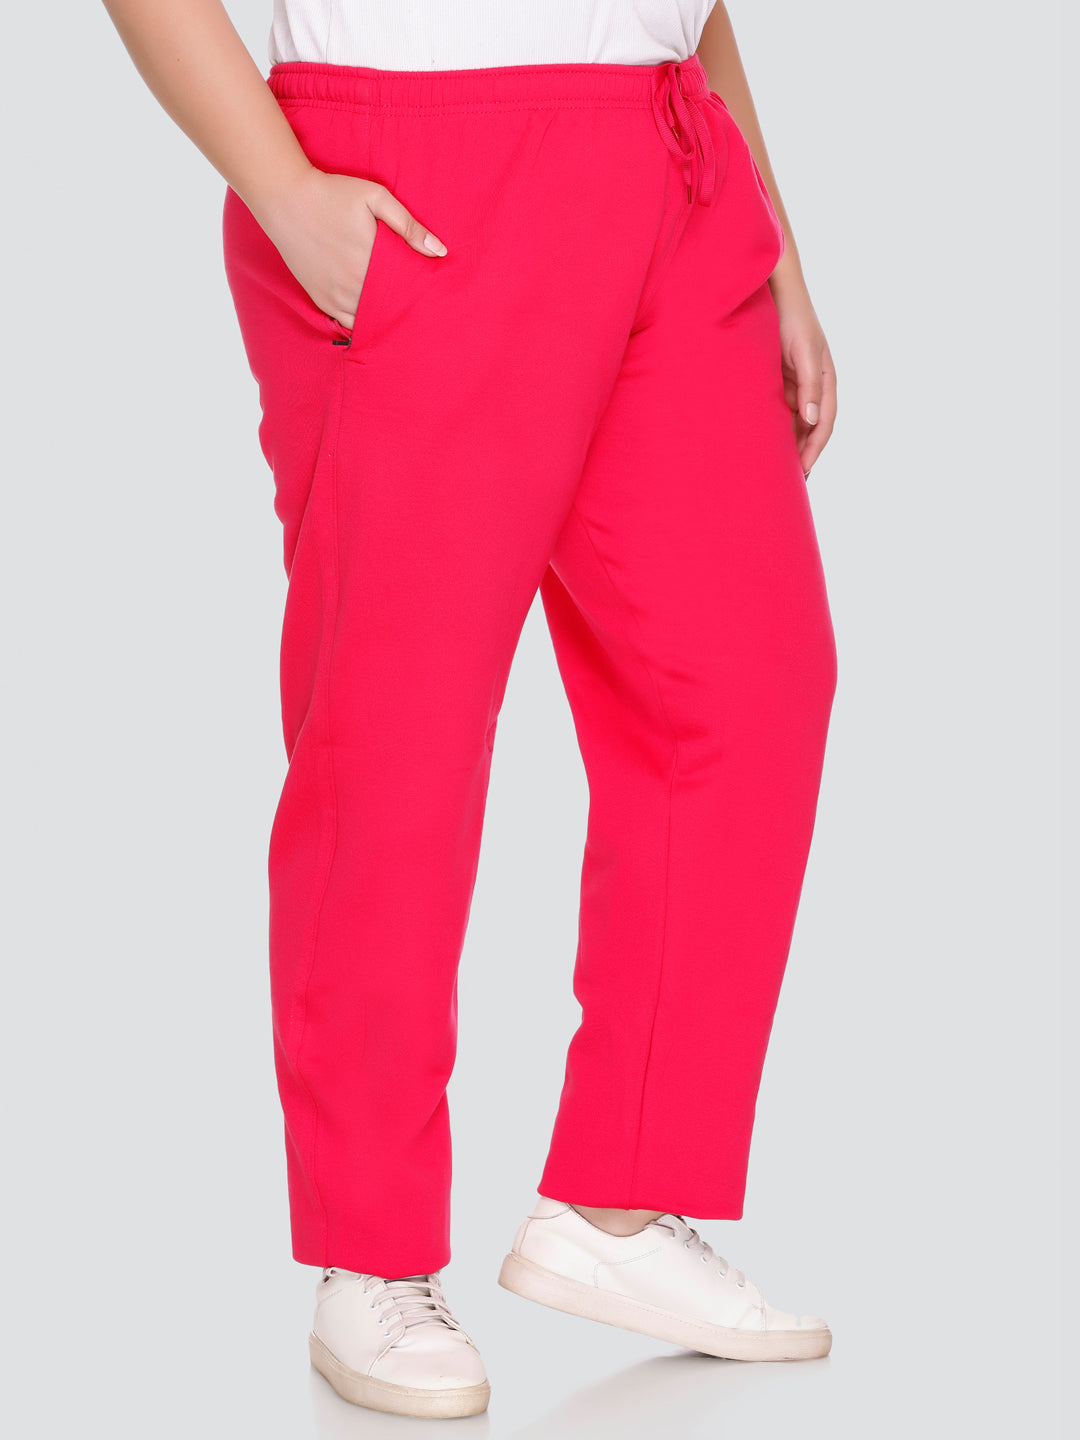 Buy Winter Cotton Fleece Printed Pink Track pants for Women In Plus Size  online at best Prices by Cupidclothings – Cupid Clothings